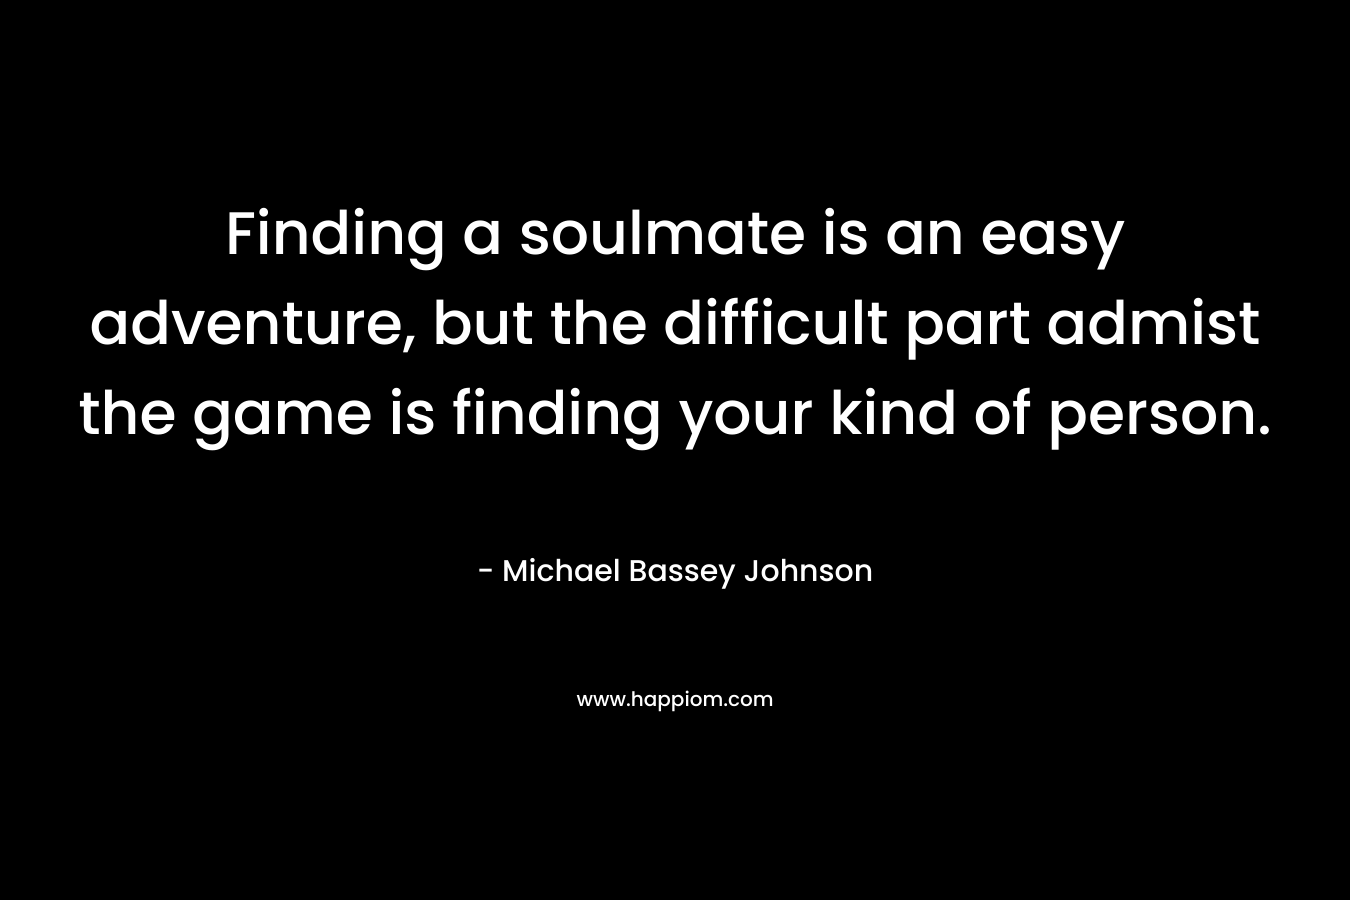 Finding a soulmate is an easy adventure, but the difficult part admist the game is finding your kind of person.